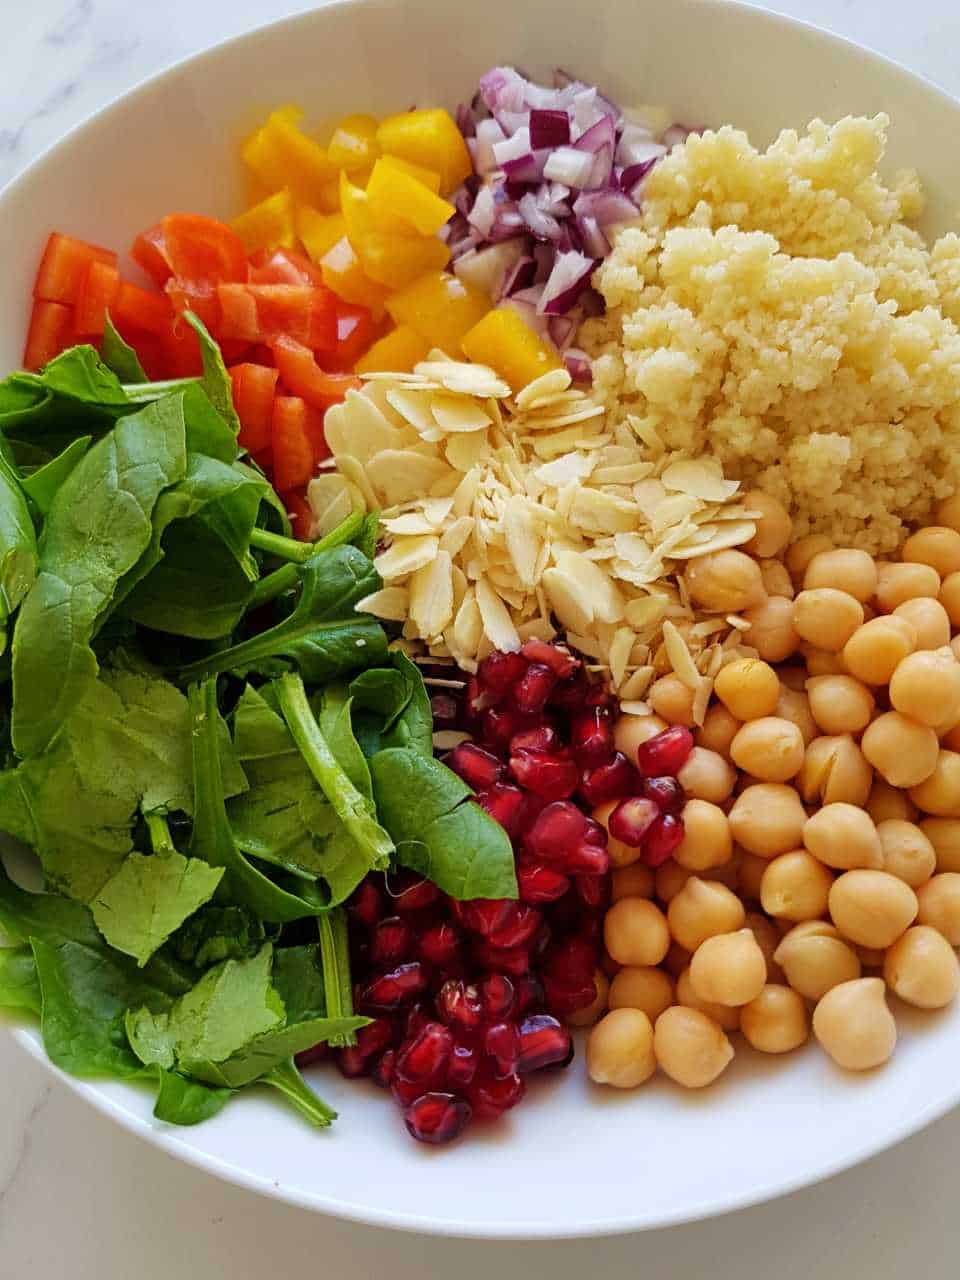 Couscous salad ingredients in a white bowl - not mixed together.